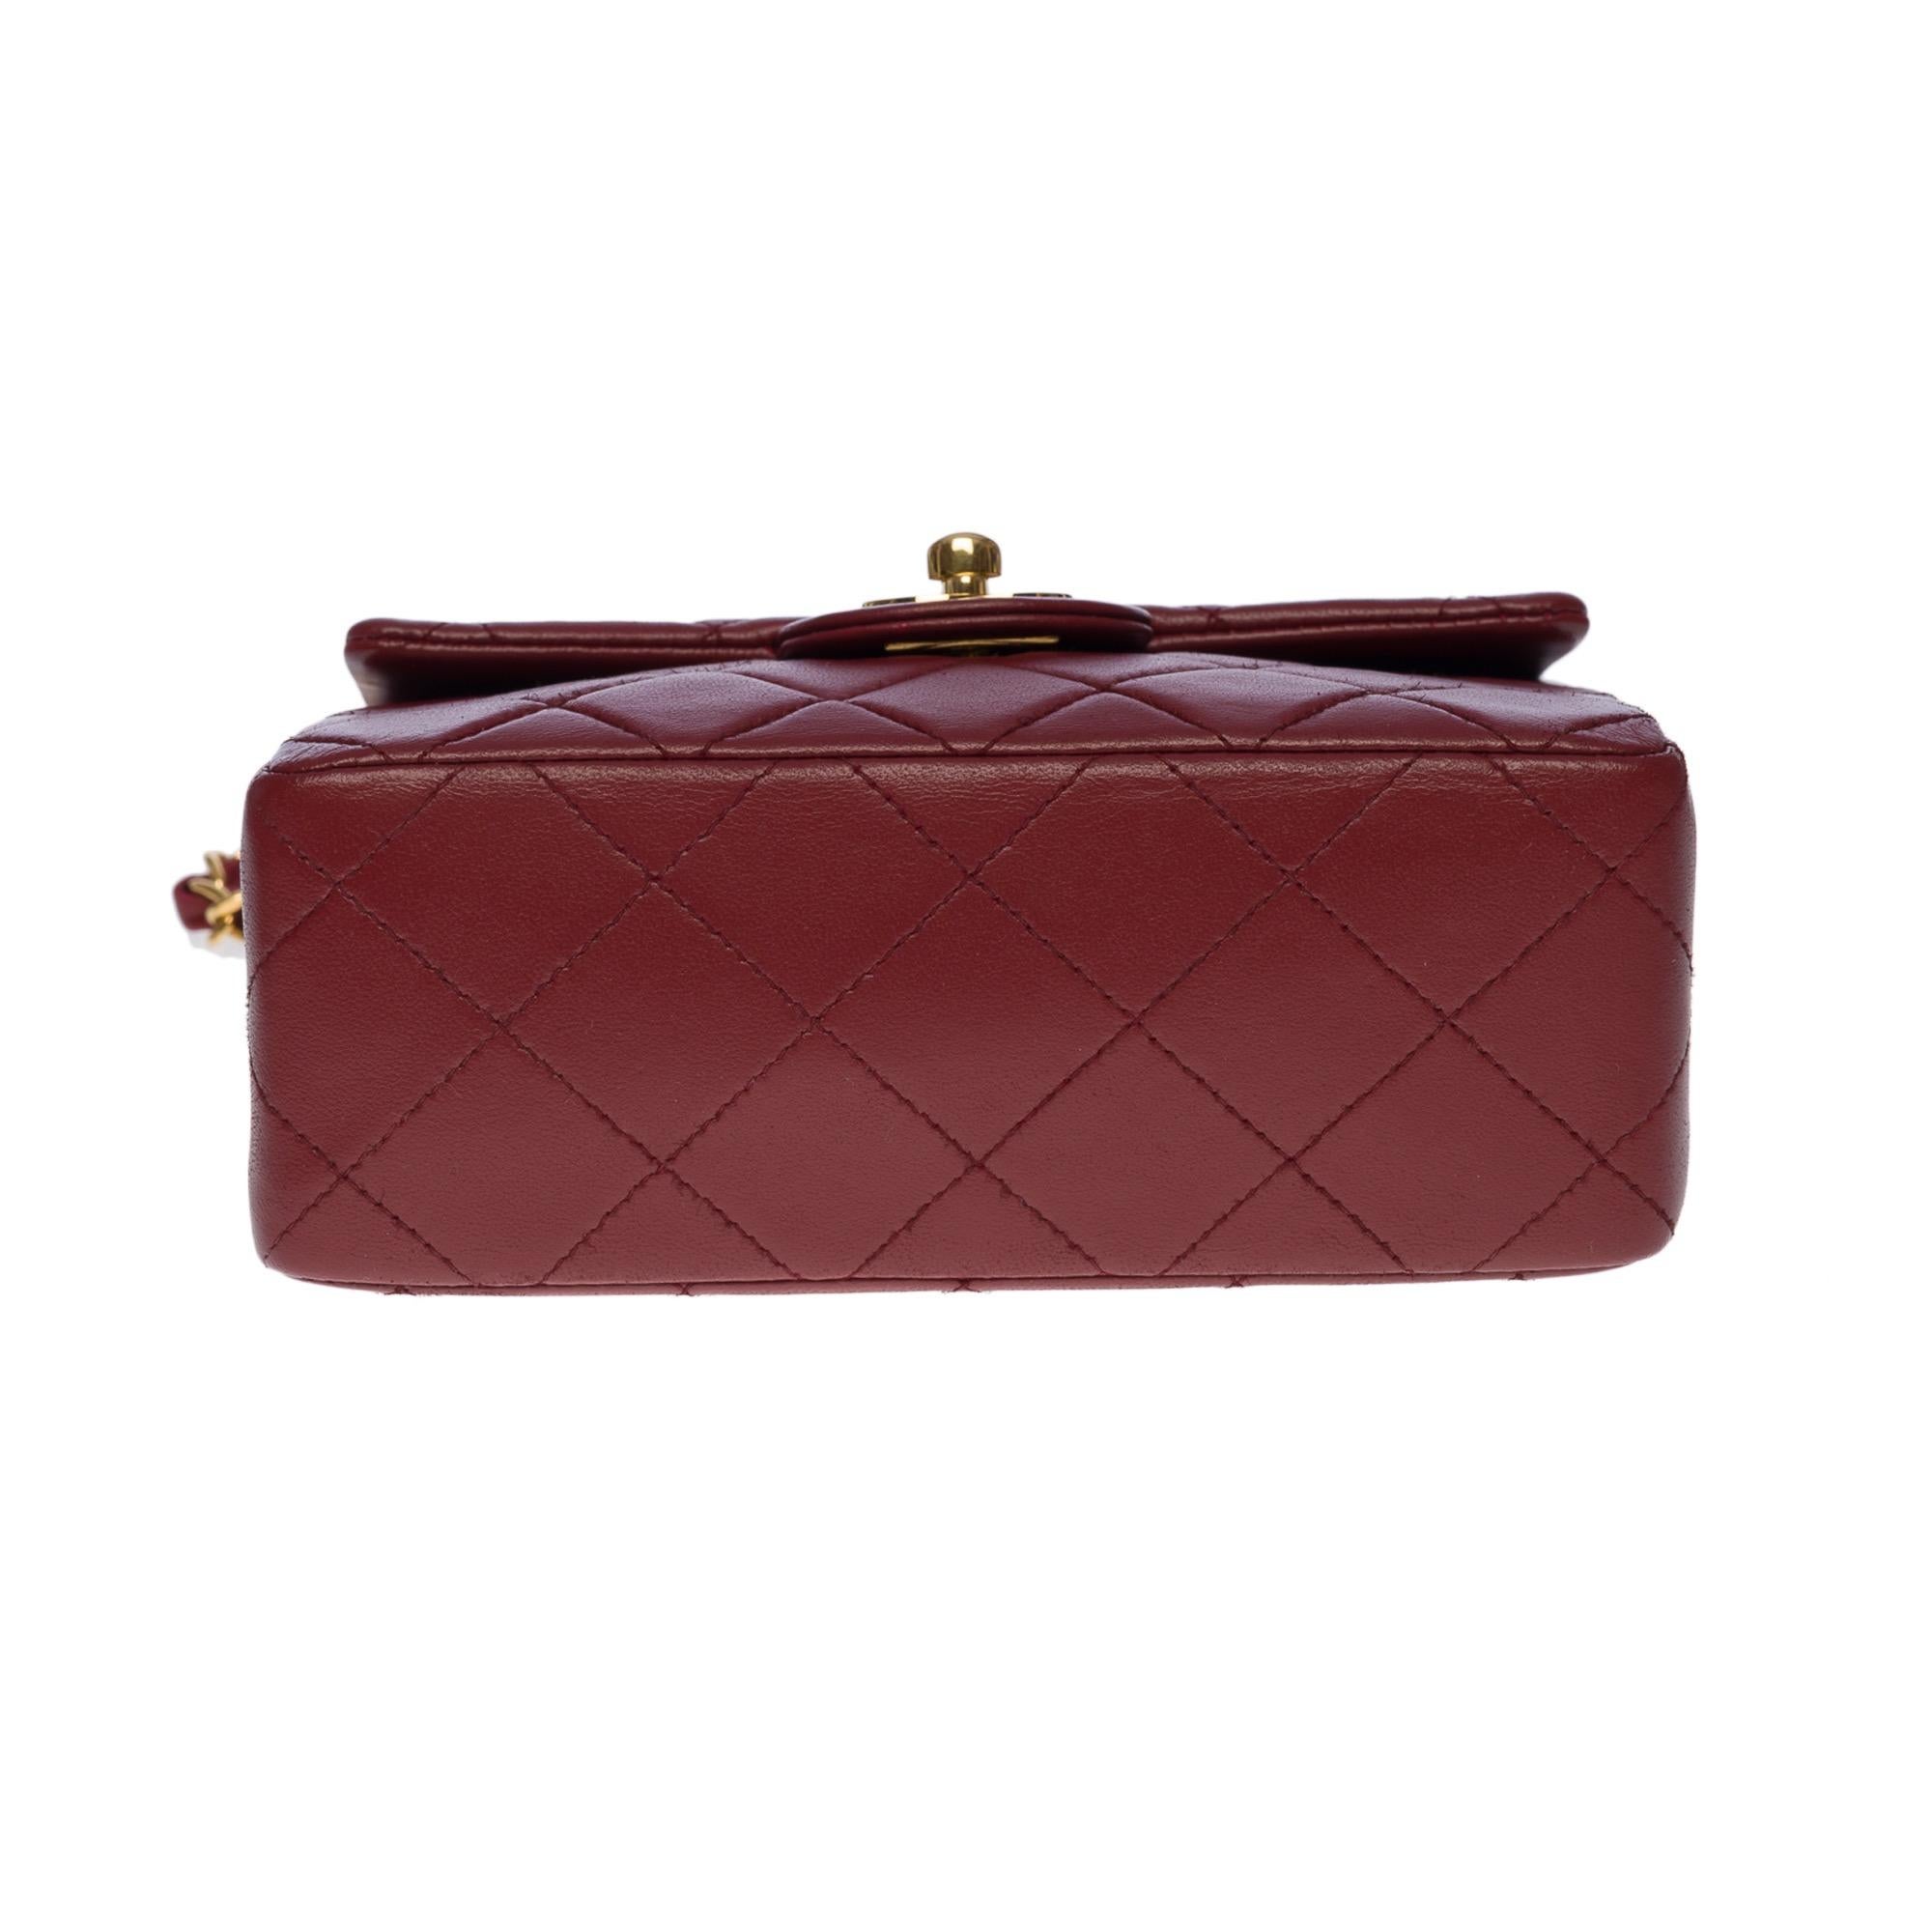 Splendid Chanel Timeless Mini flap bag in burgundy quilted leather, GHW 2